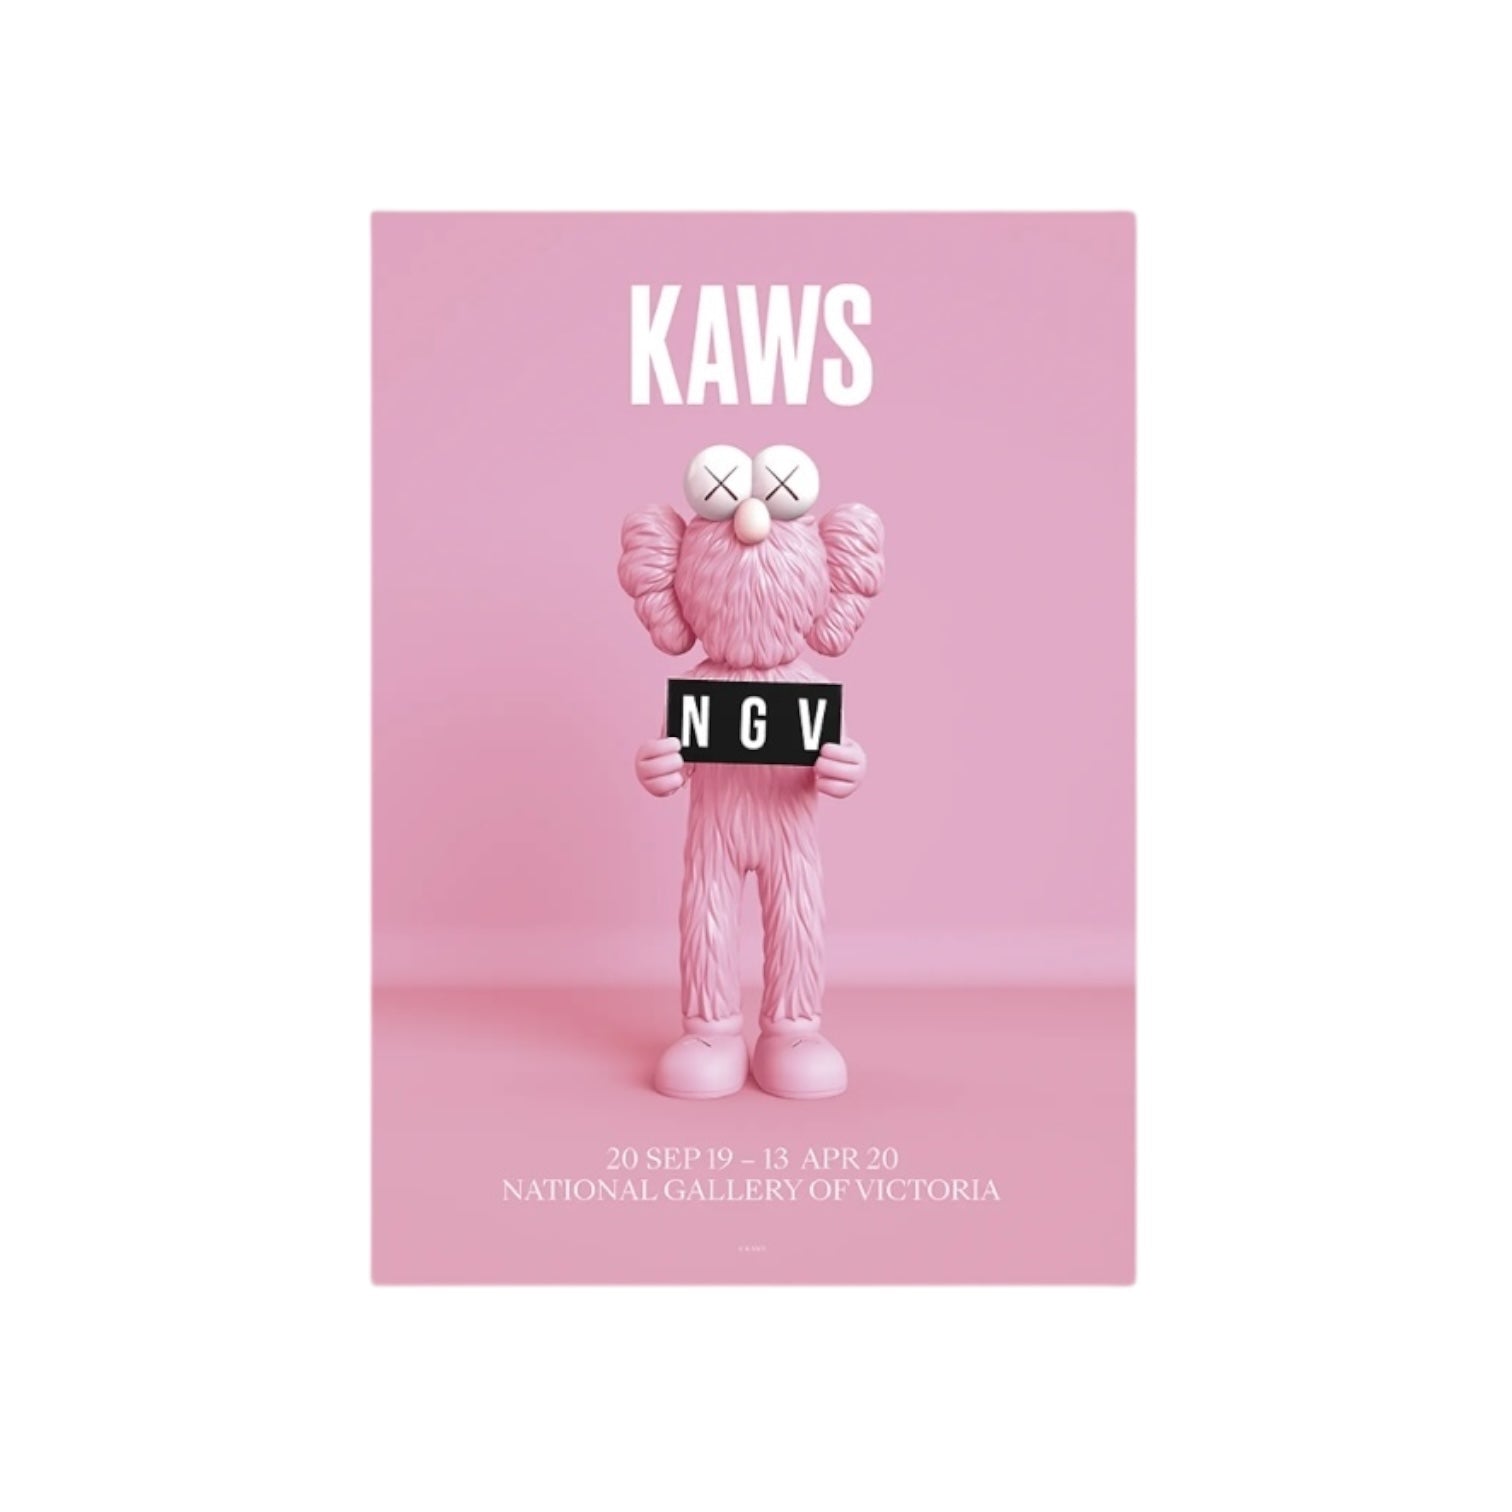 Kaws x NGV Pink BFF Exhibition Poster